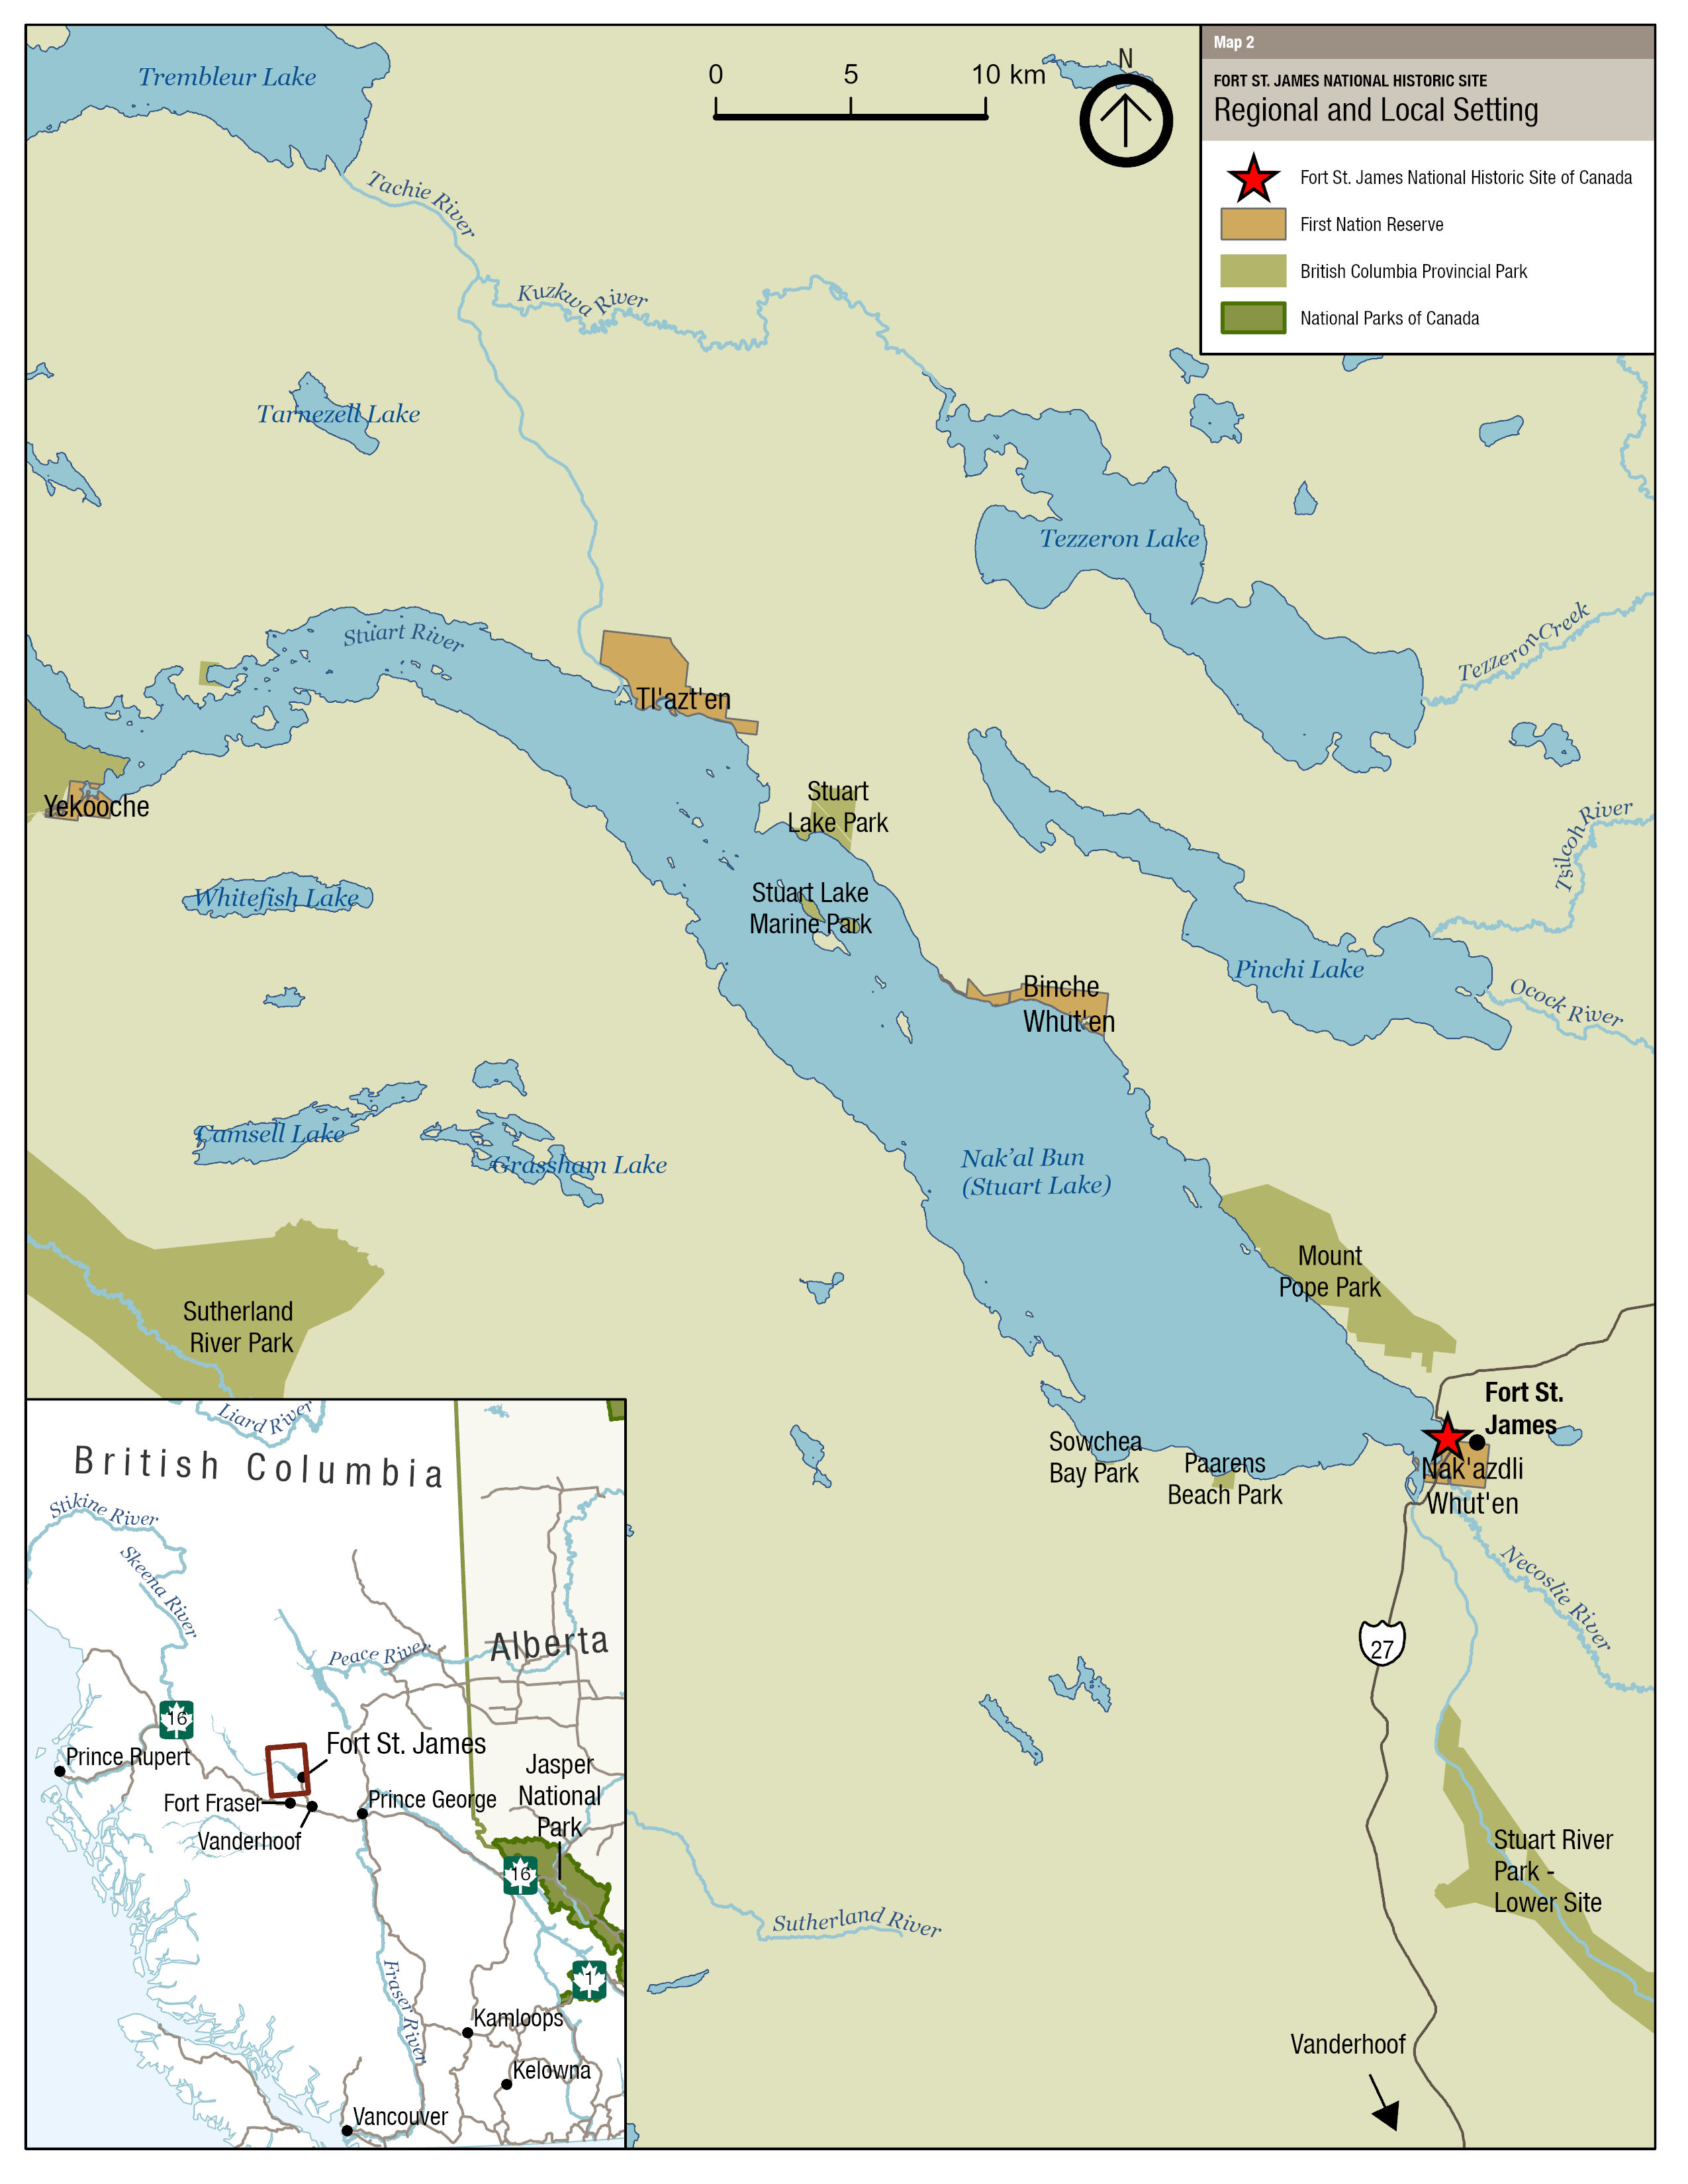 The map shows the regional geographic setting of Fort St. James National Historic Site and includes several surrounding First Nations, provincial parks, lakes and rivers.